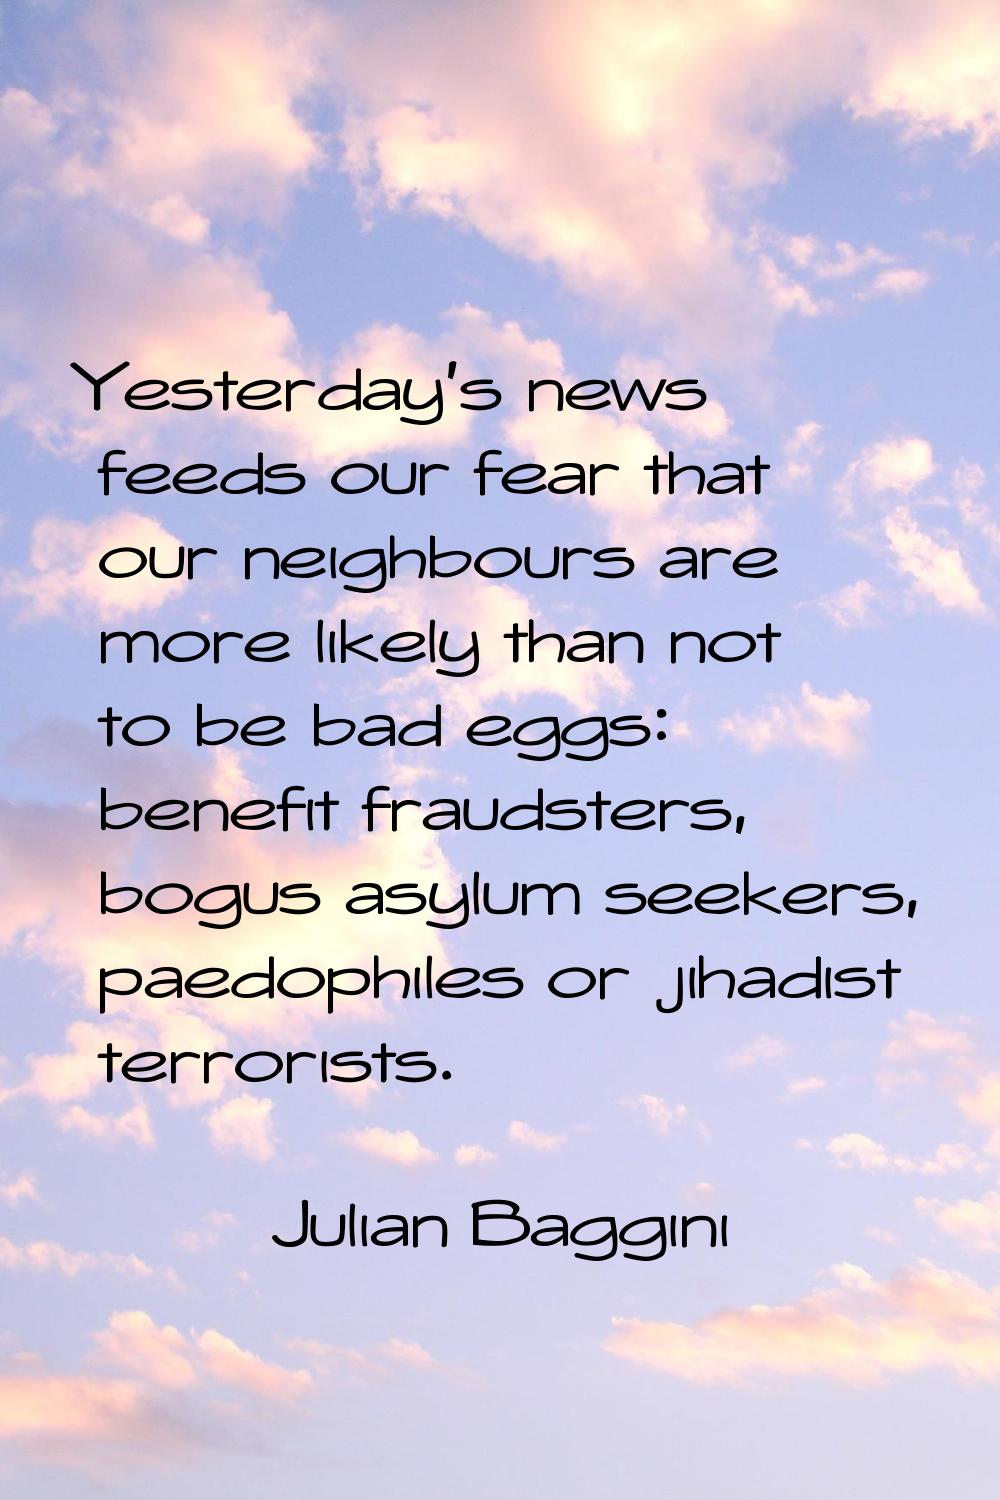 Yesterday's news feeds our fear that our neighbours are more likely than not to be bad eggs: benefi